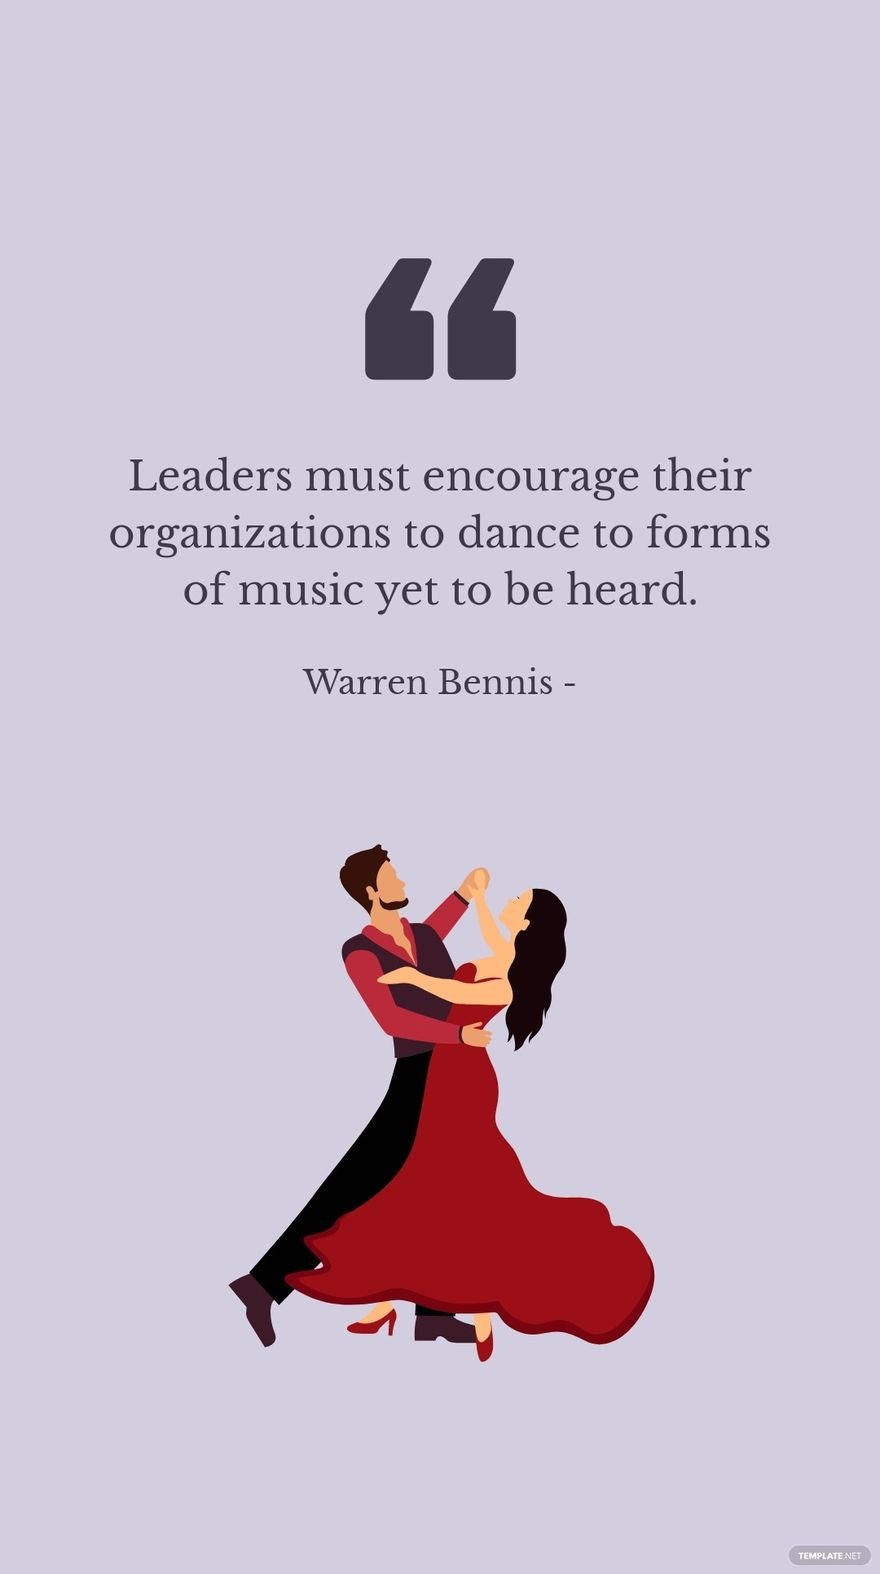 Free Warren Bennis - Leaders must encourage their organizations to dance to forms of music yet to be heard.